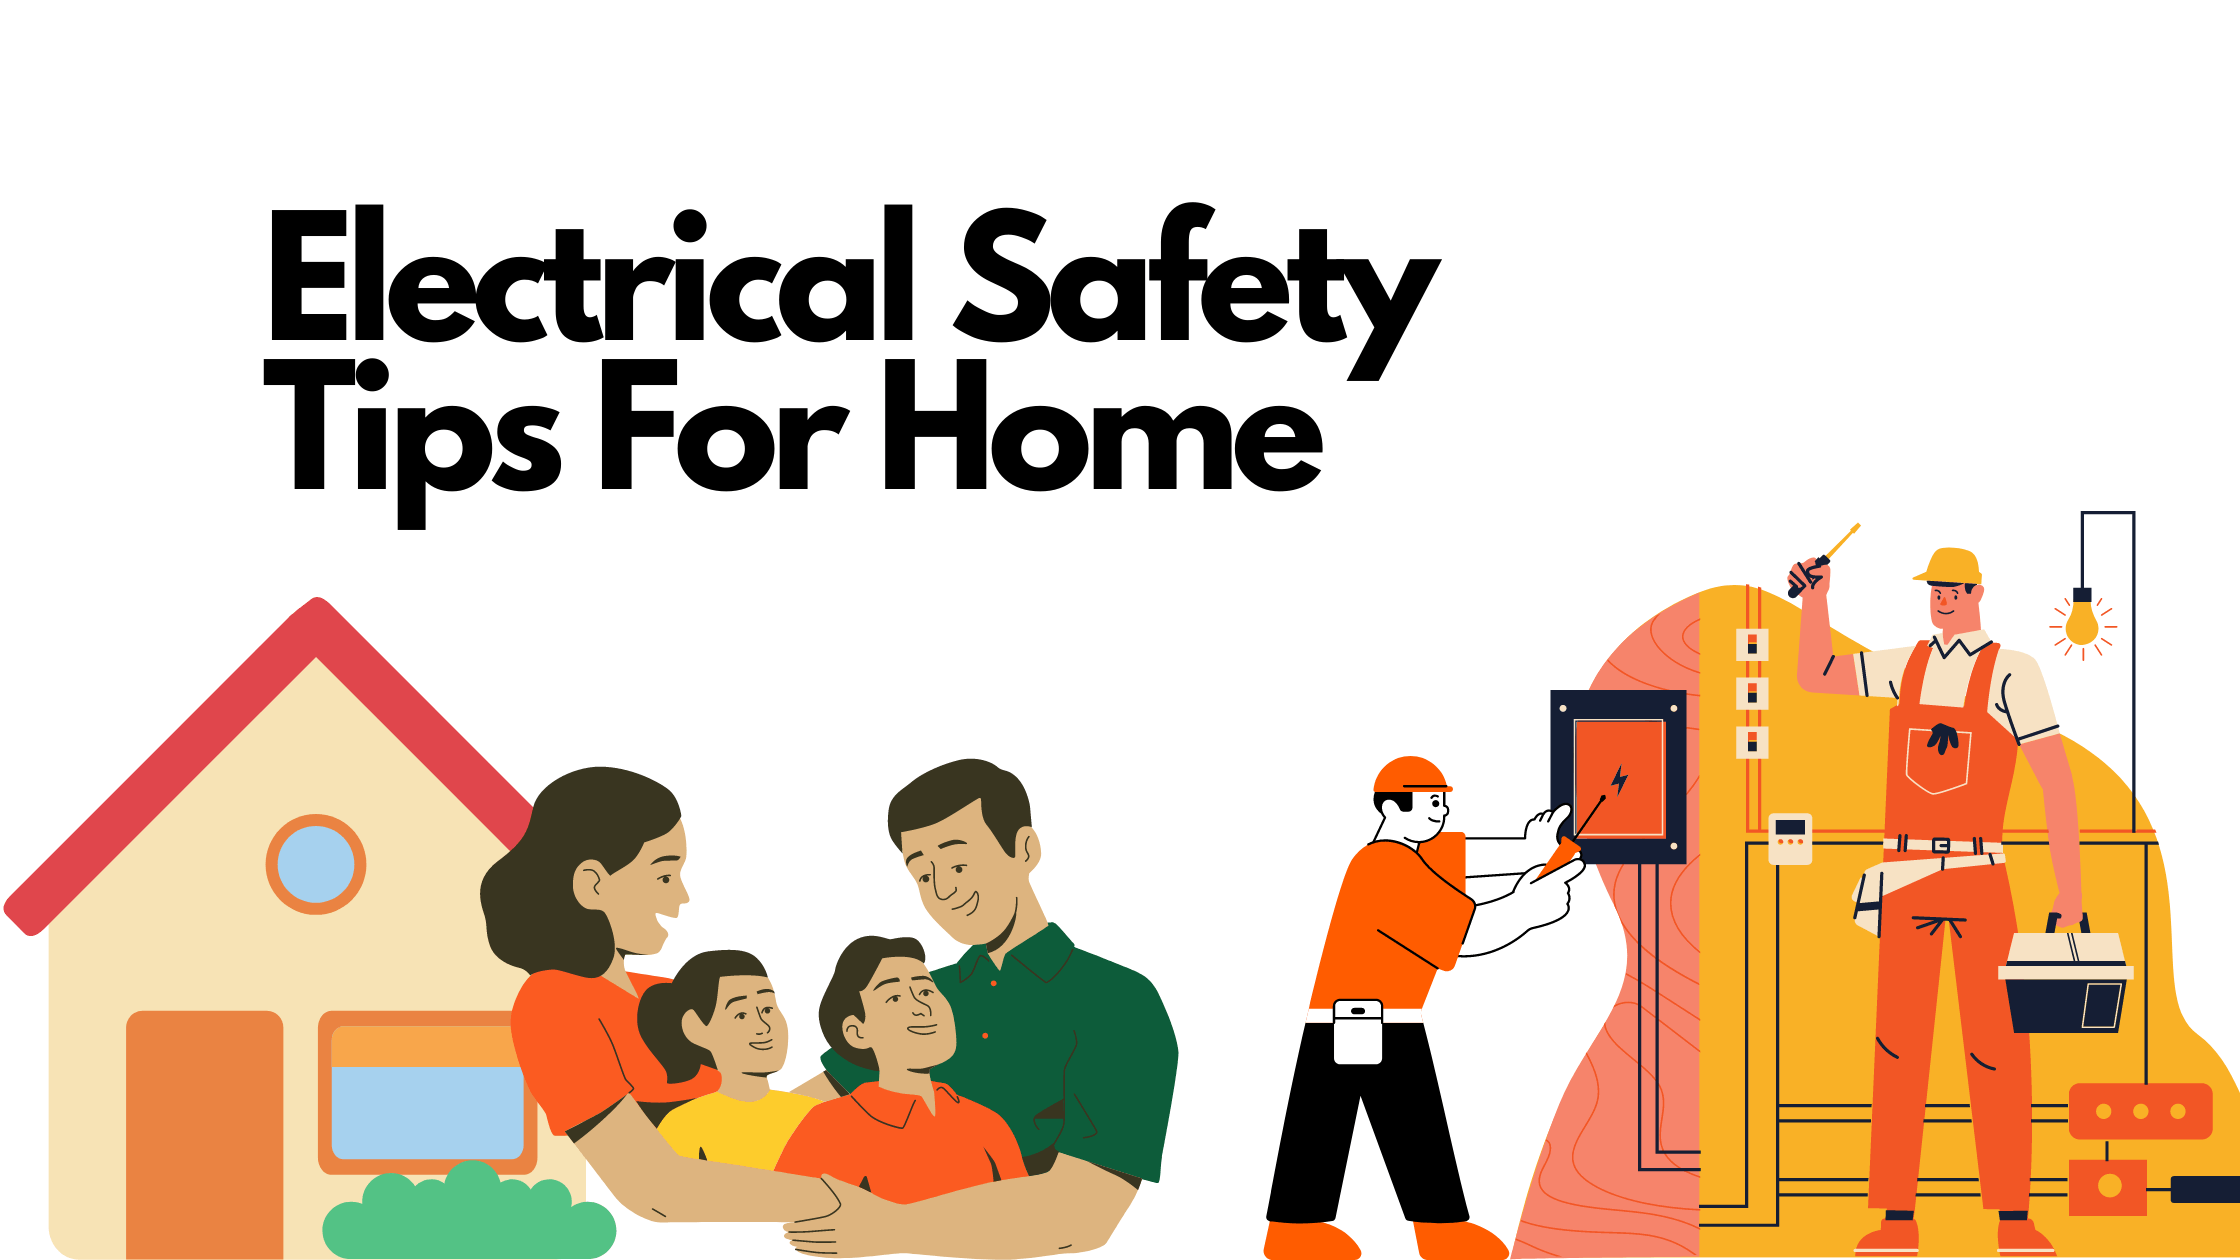 promag - electrical safety tips for home (1)